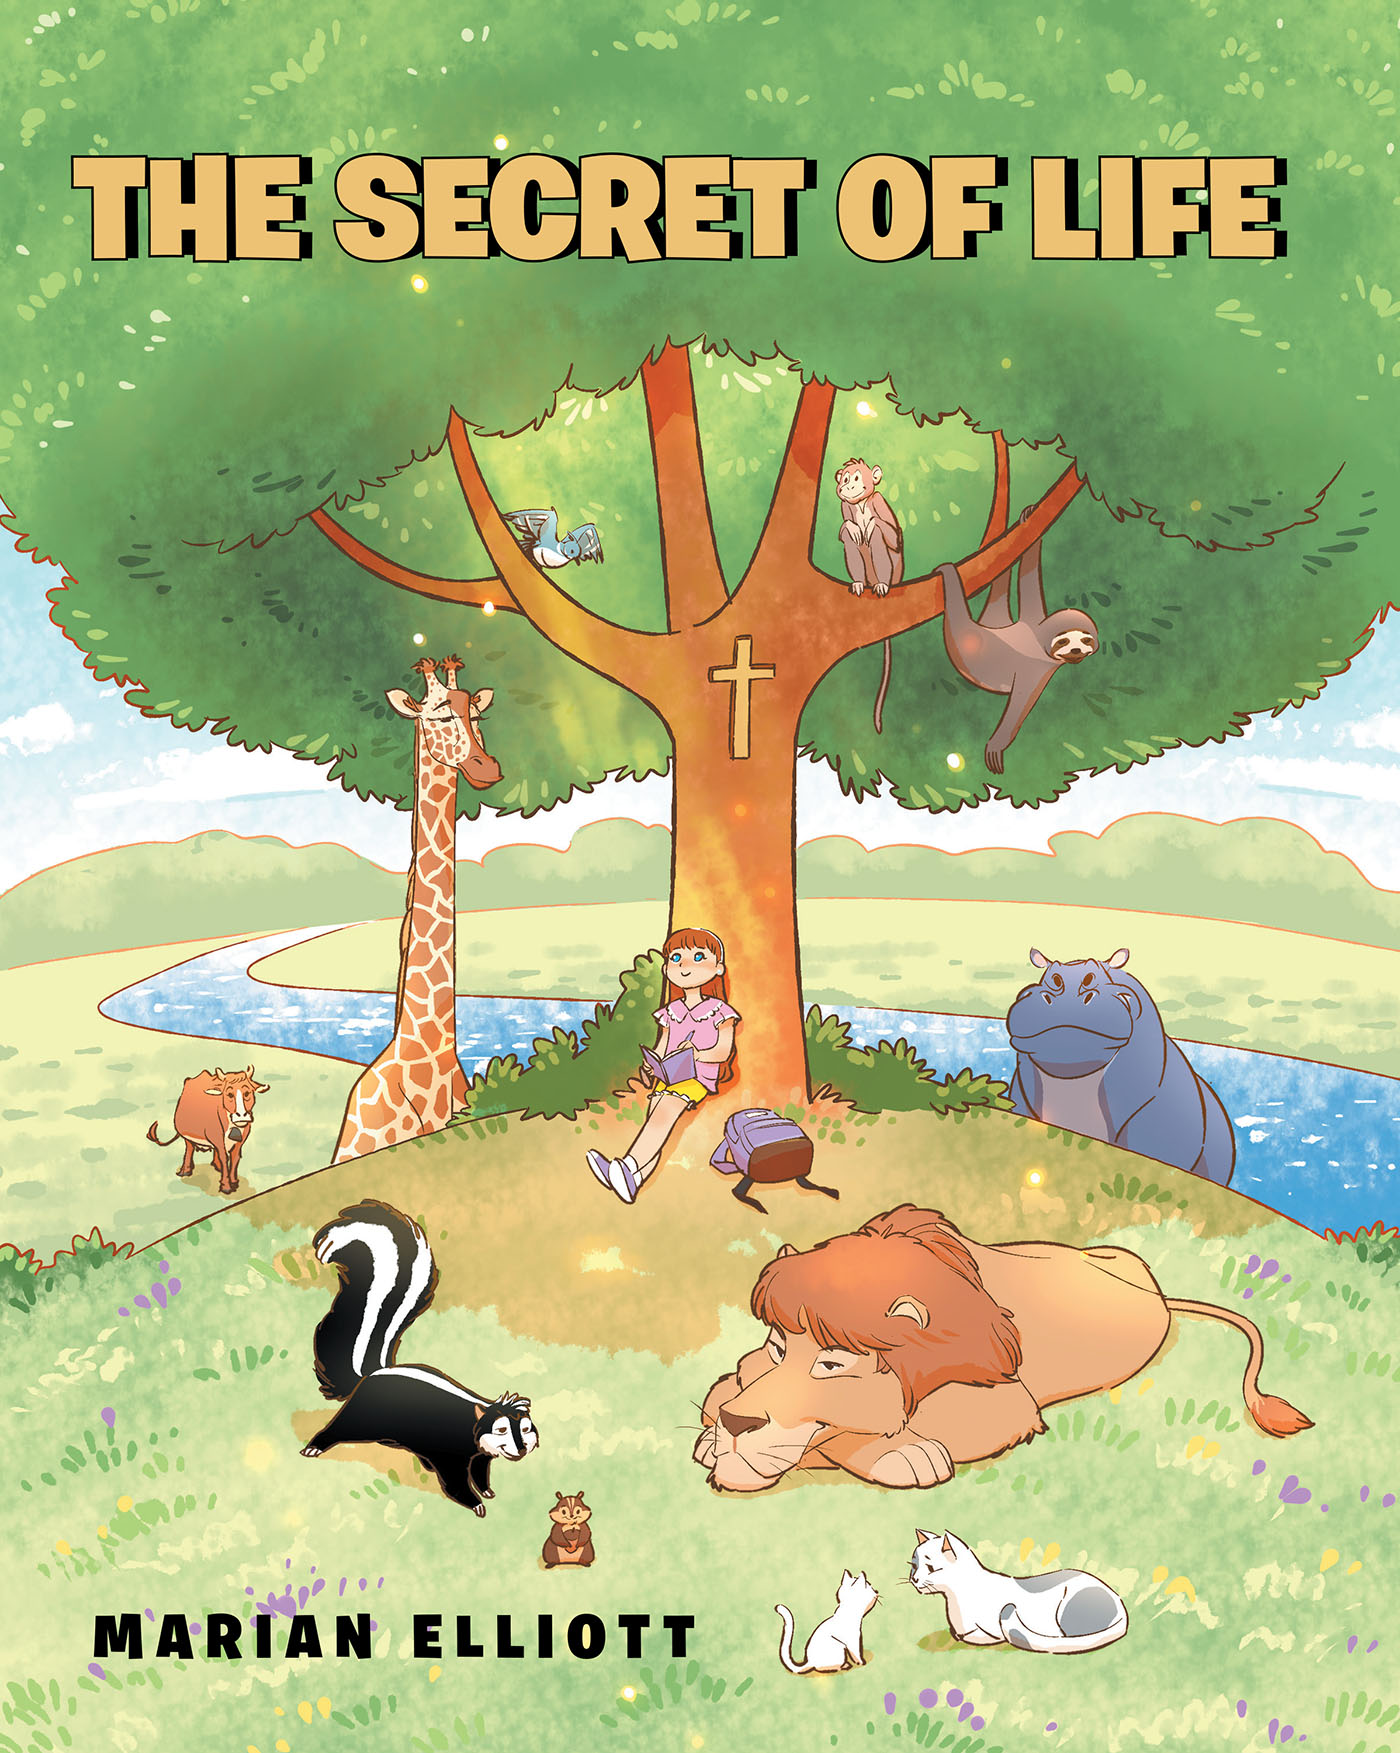 Marian Elliott’s Newly Released “The Secret Of Life” is a Charming Children’s Narrative That Offers Important Lessons of Life and Faith